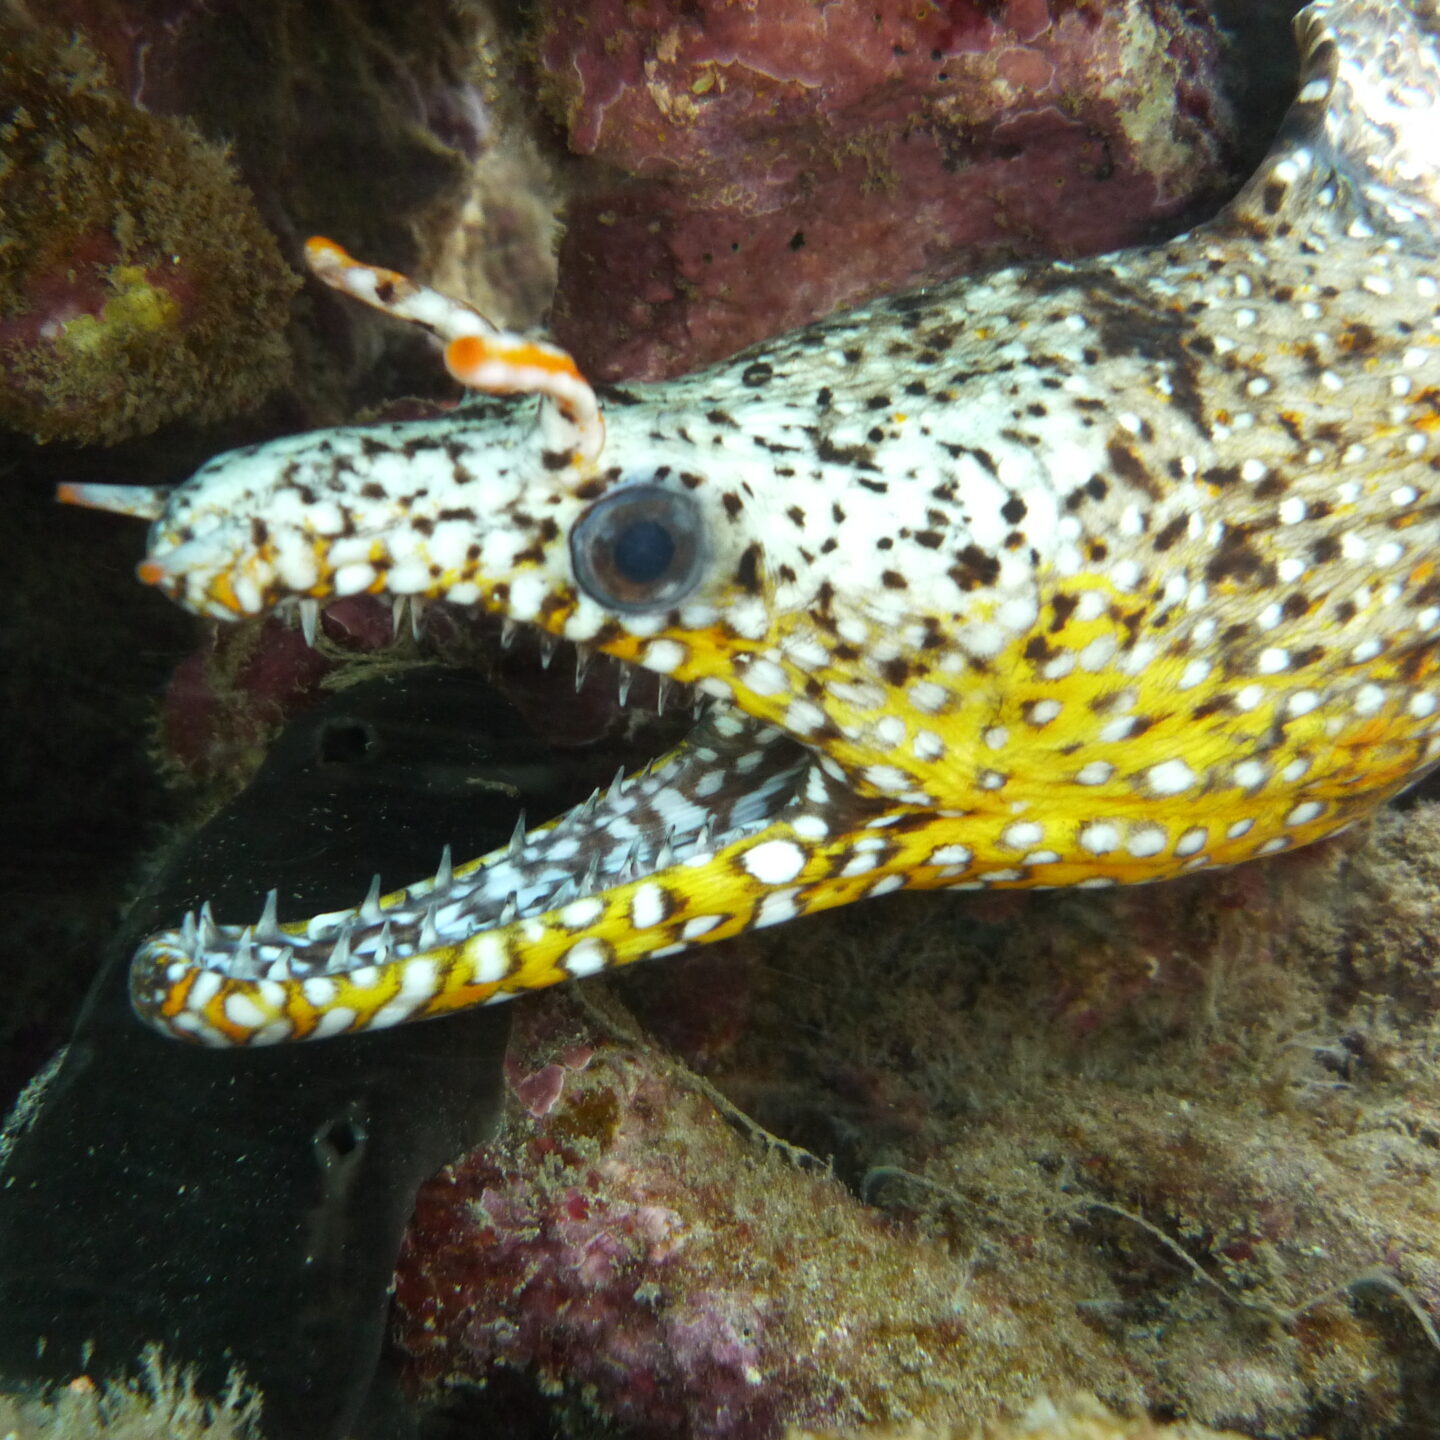 Dragon Eel Fish Underwater in Yellow and White Color